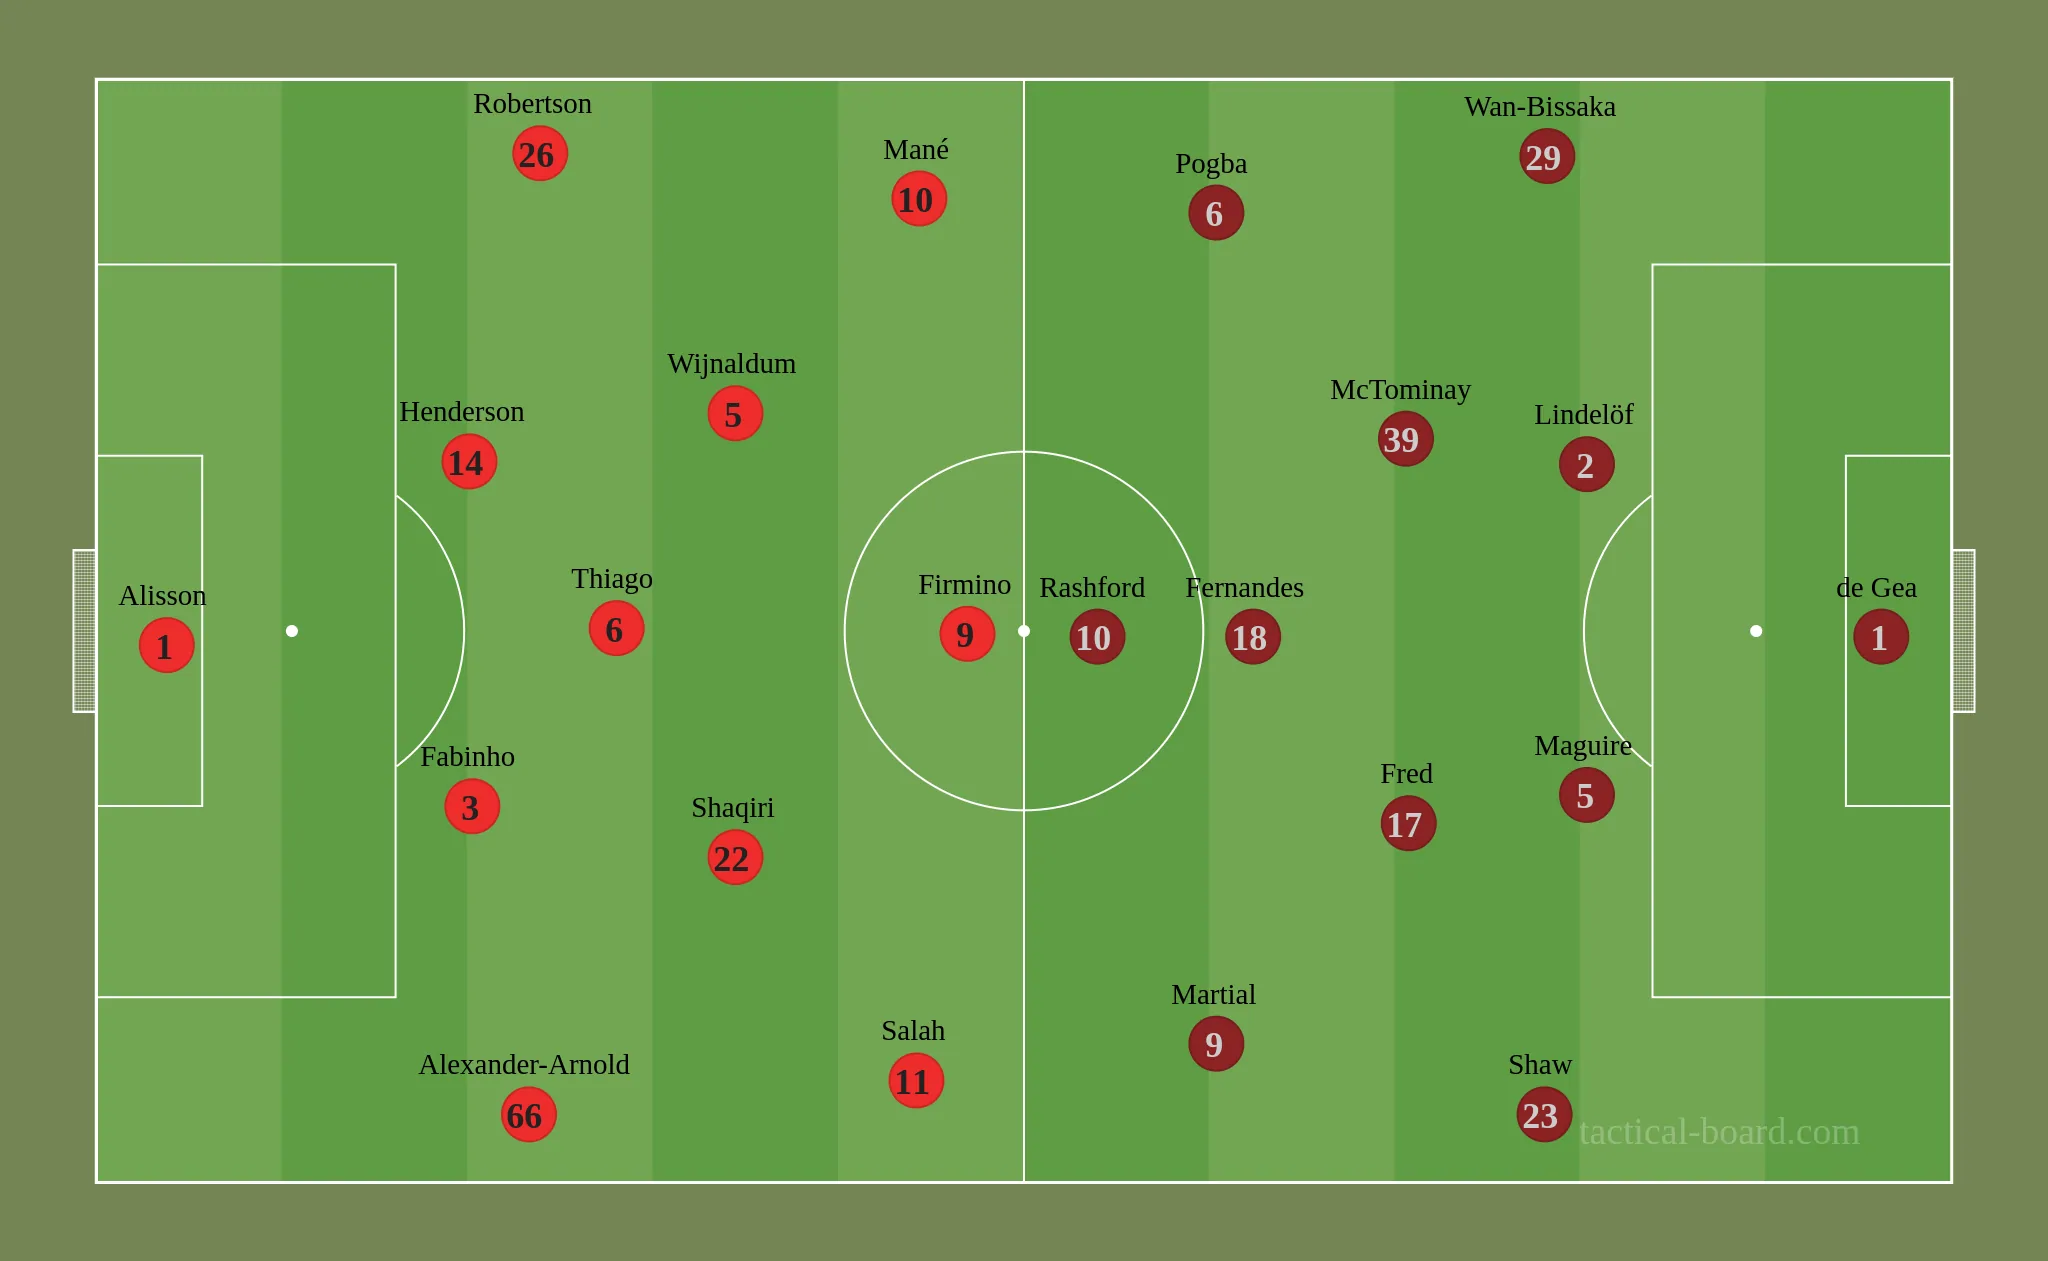 Tactical analysis: How Liverpool and Manchester United cancelled each other out at Anfield